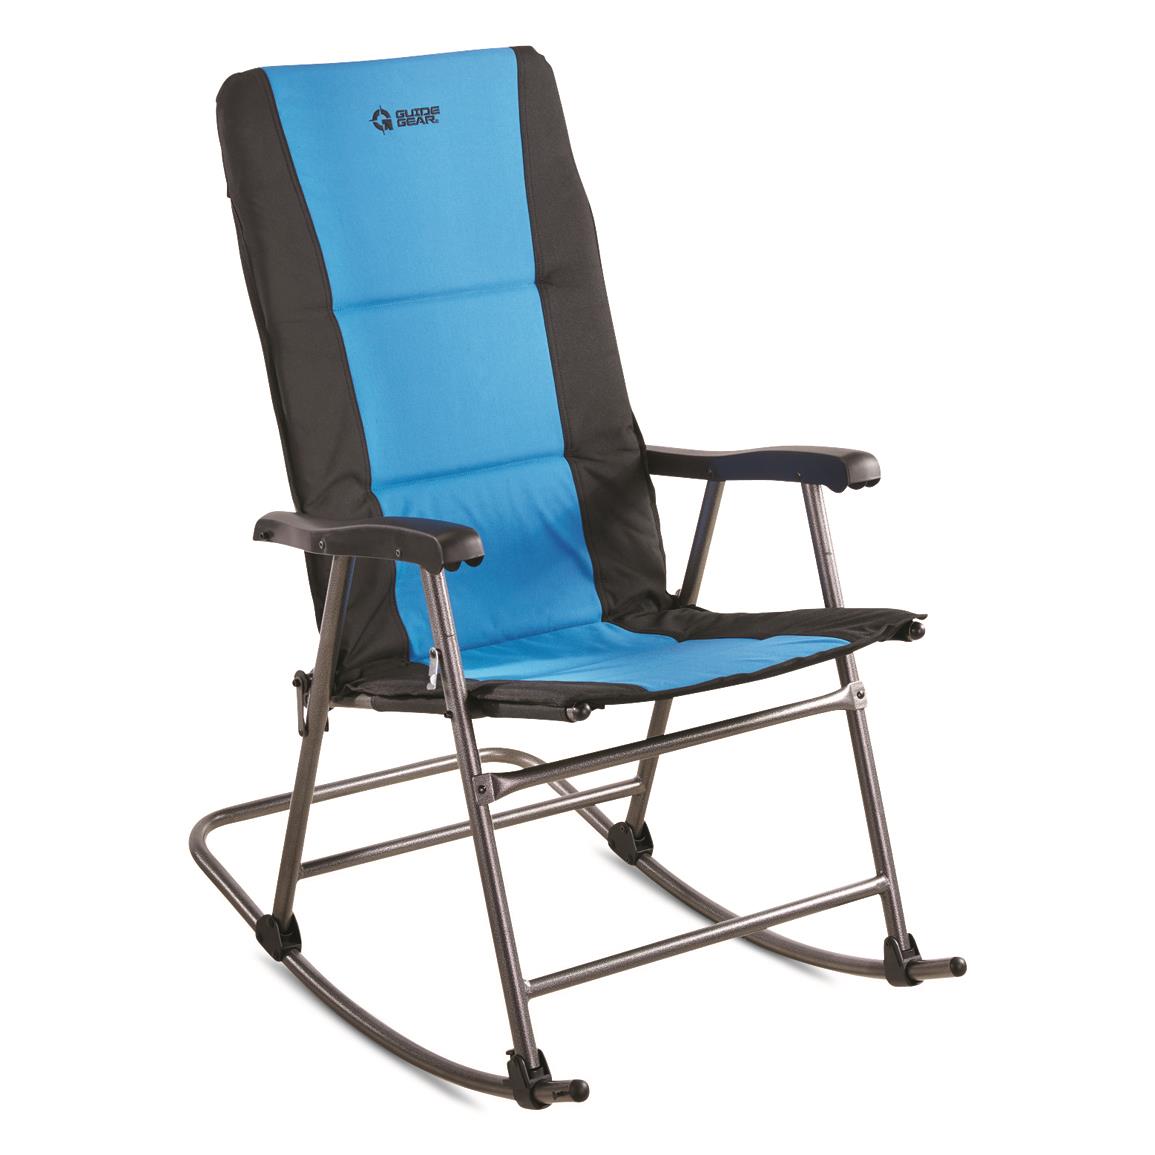 Guide Gear Oversized Rocking Camp Chair, 500 lb. Capacity